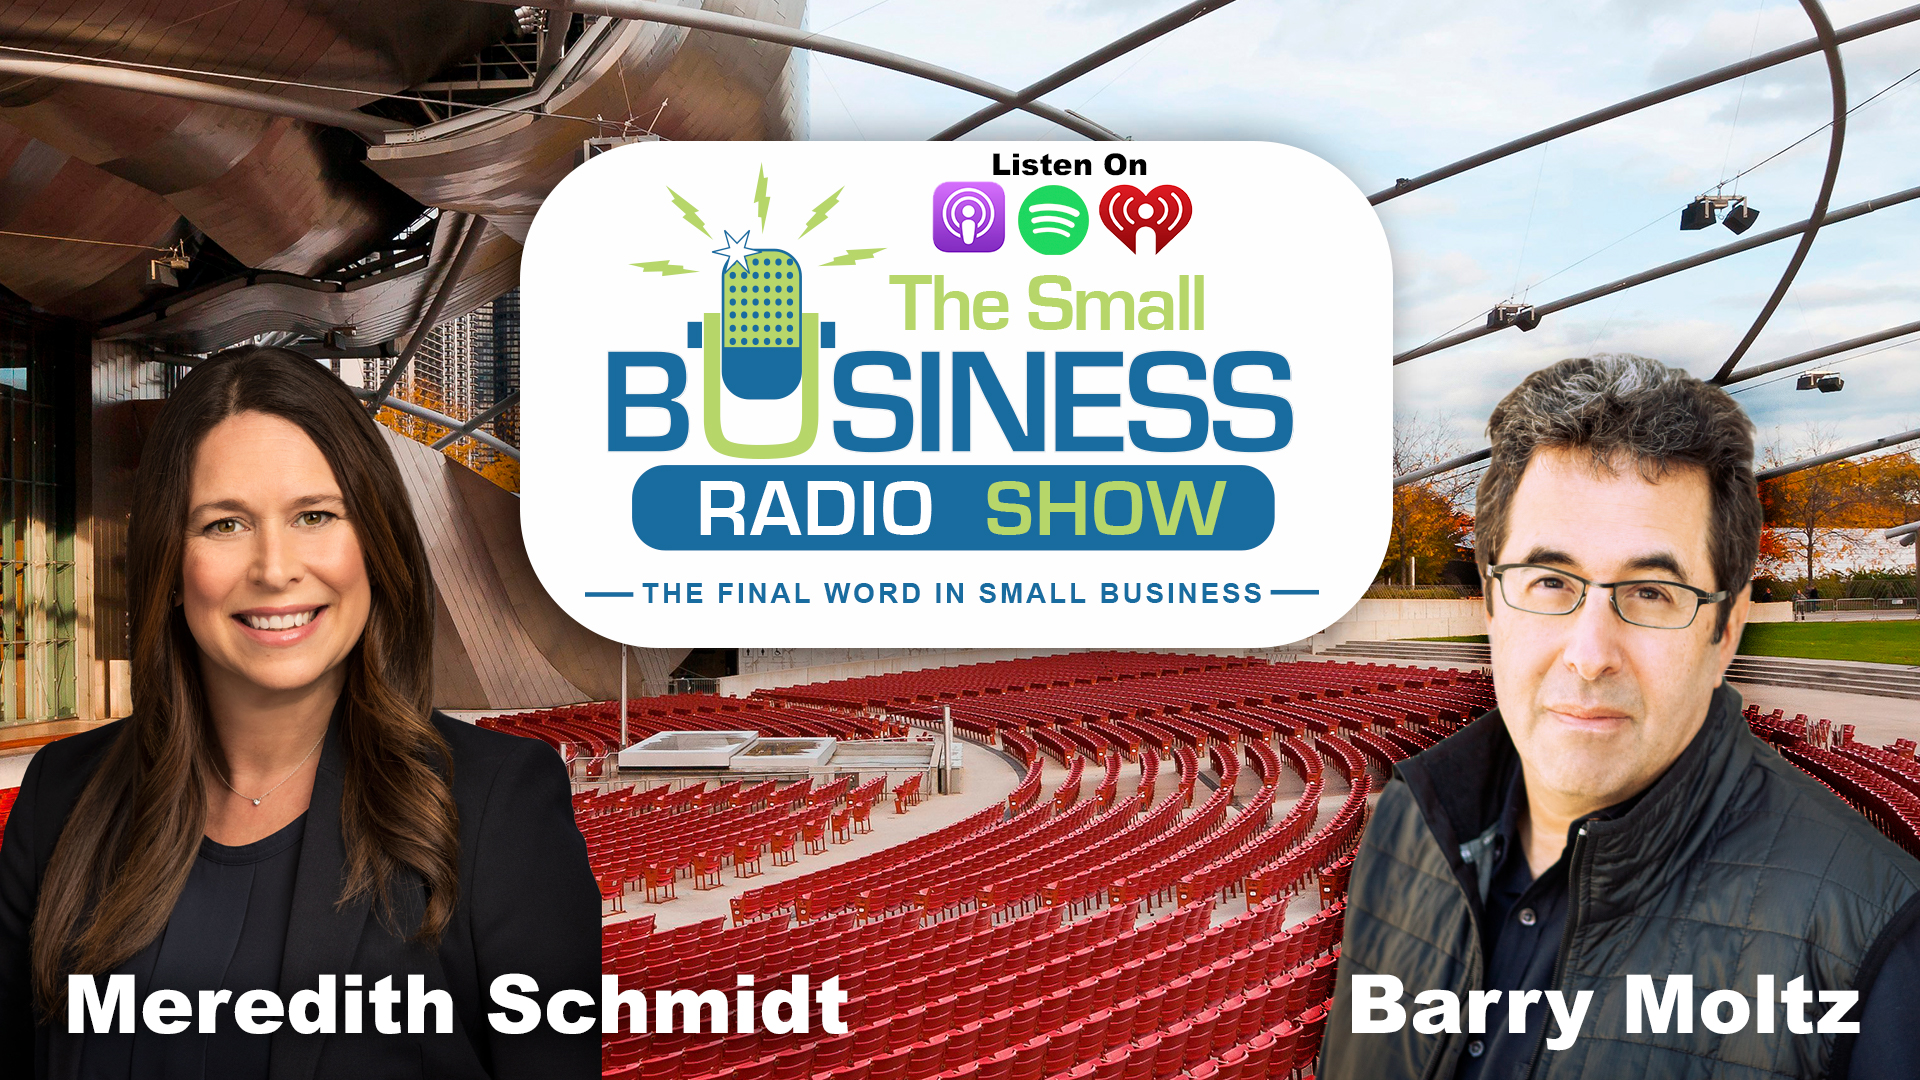 Meredith Schmidt on The Small Business Radio Show